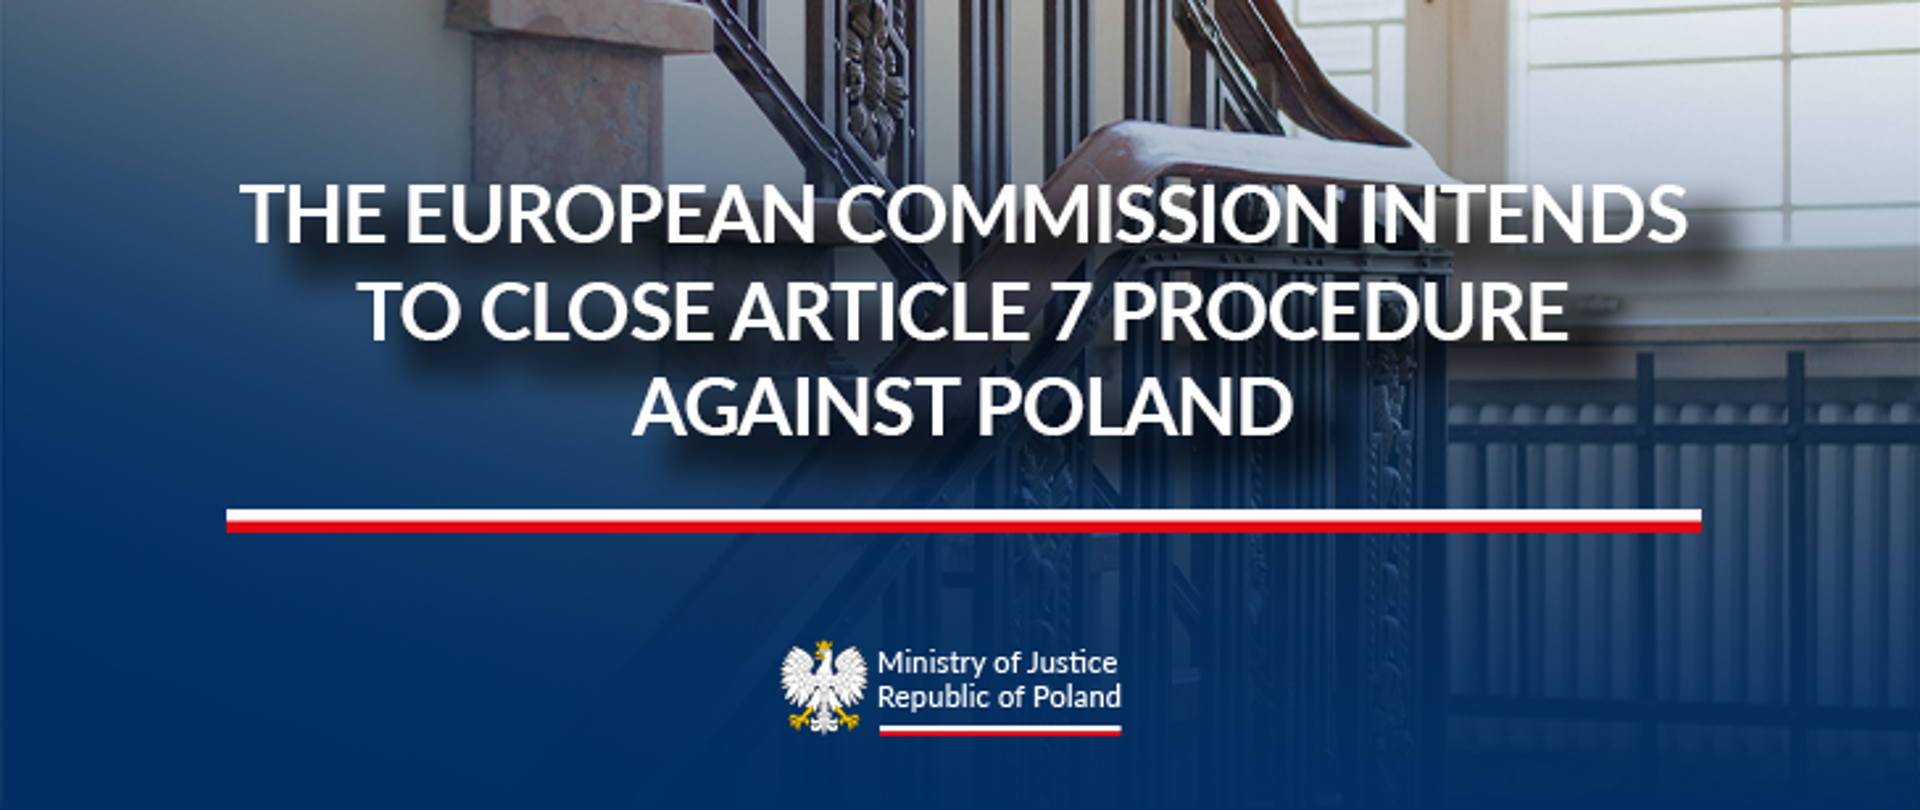 The European Commission intends to close Article 7 procedure against Poland